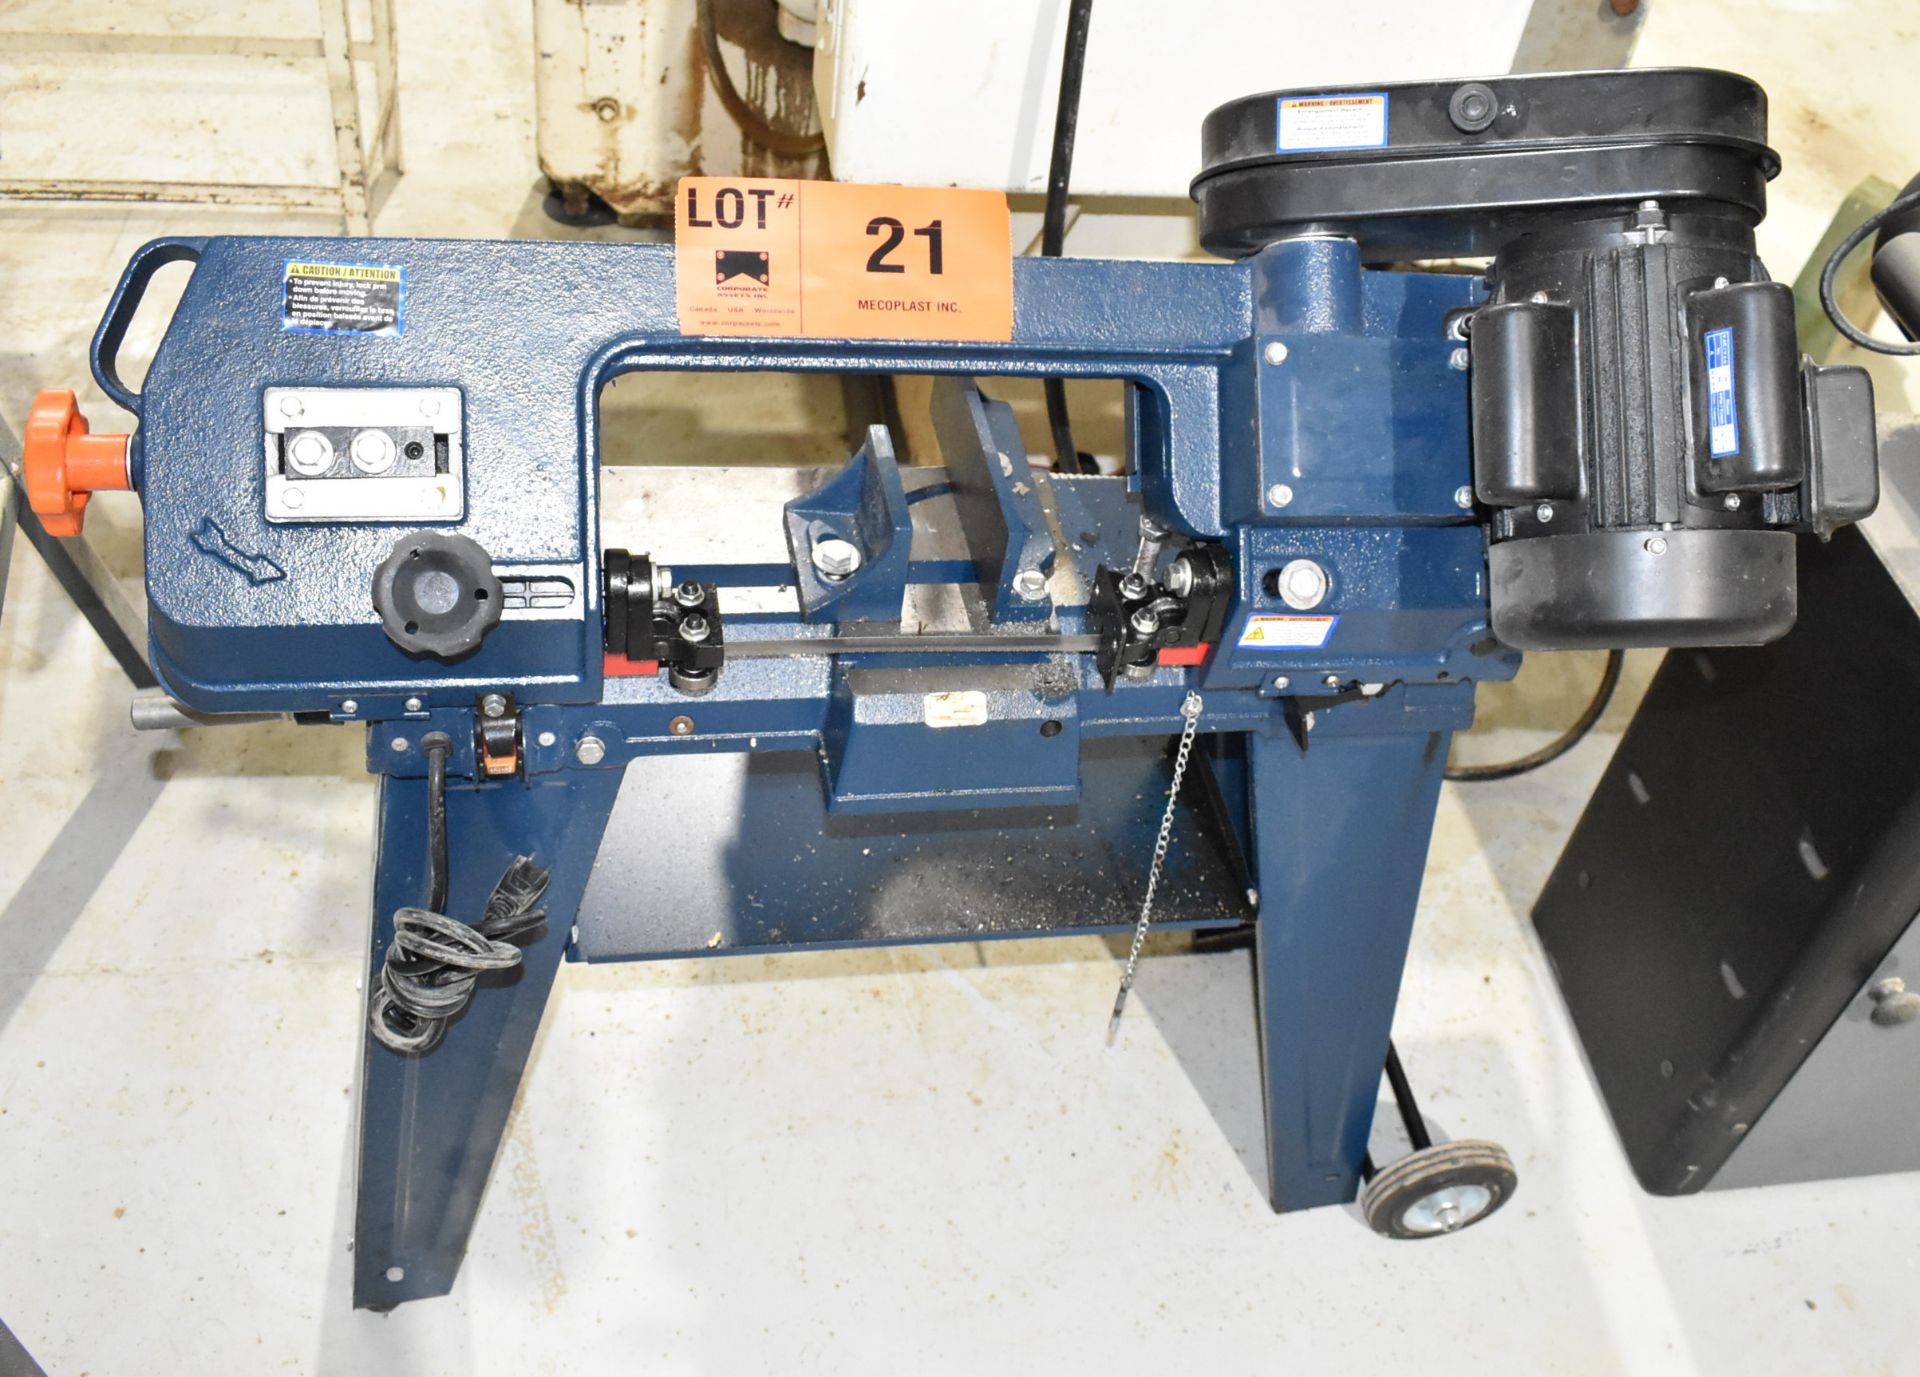 4-1/2" METAL CUTTING BANDSAW WITH 80, 120 AND 200 FT/MIN SPEEDS, S/N N/A